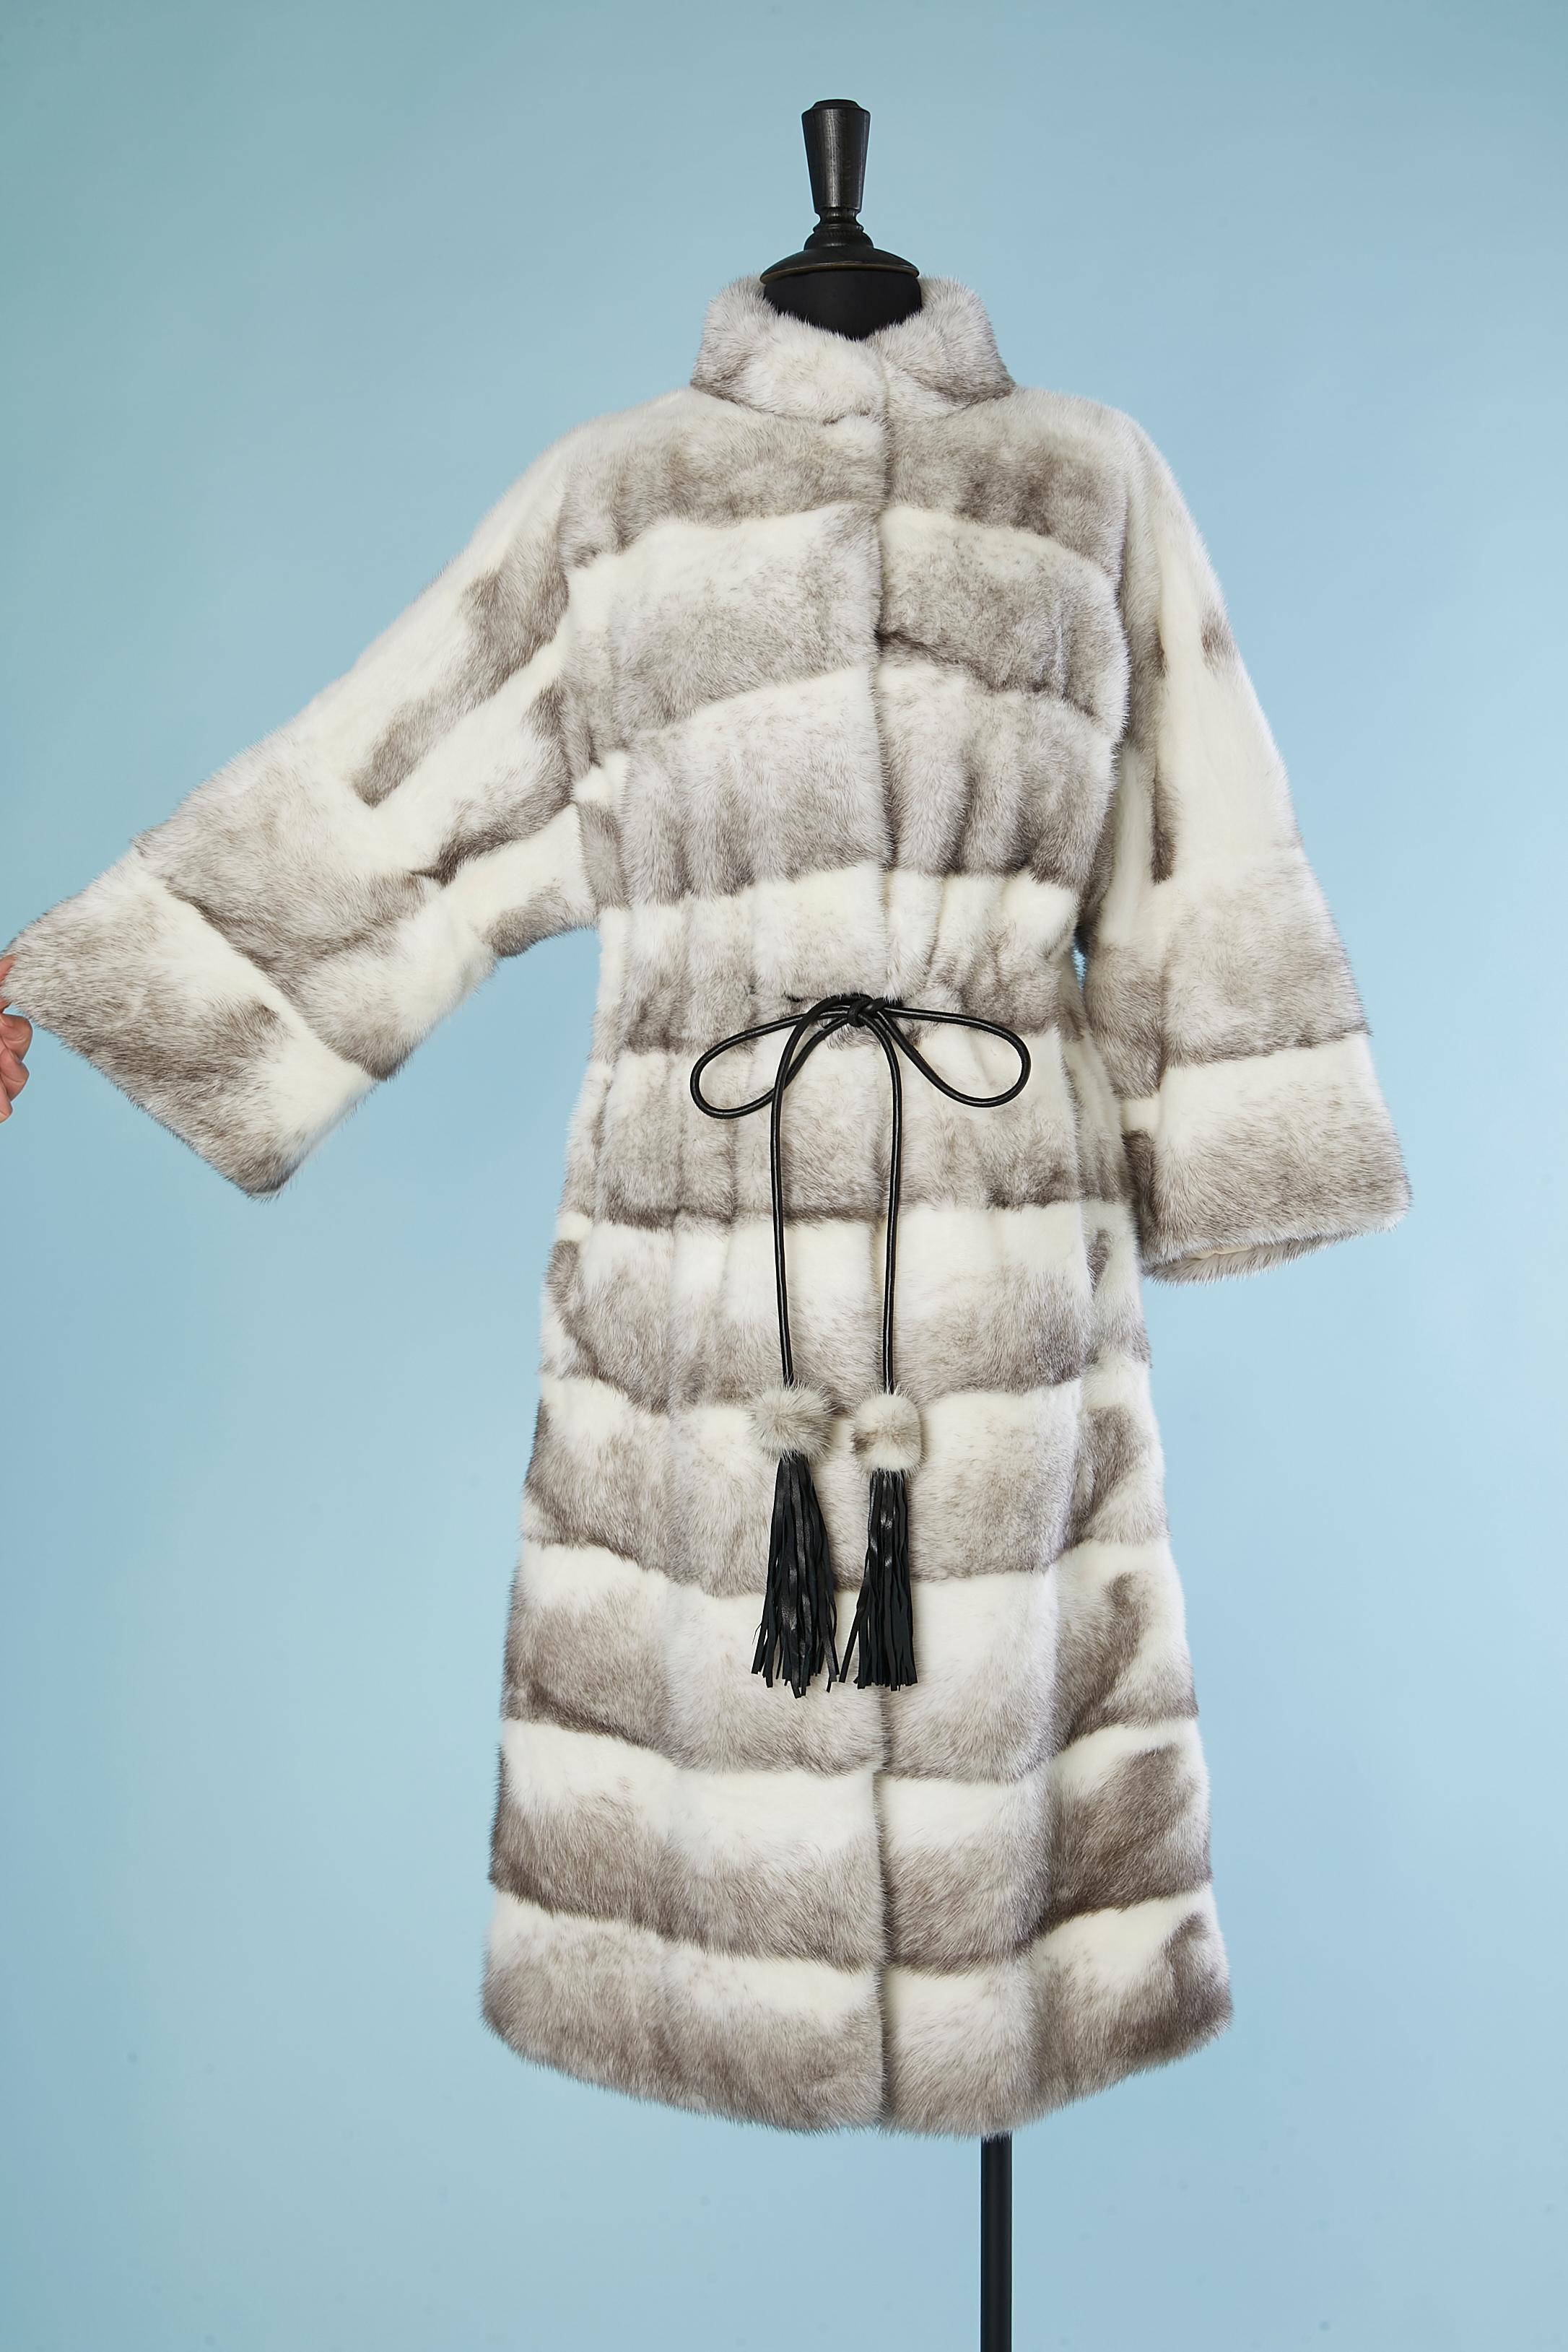 White and grey Platinium Quality Mink coat with black leather belt ( lap belt) and leather fringes pompoms. Mink quality is 